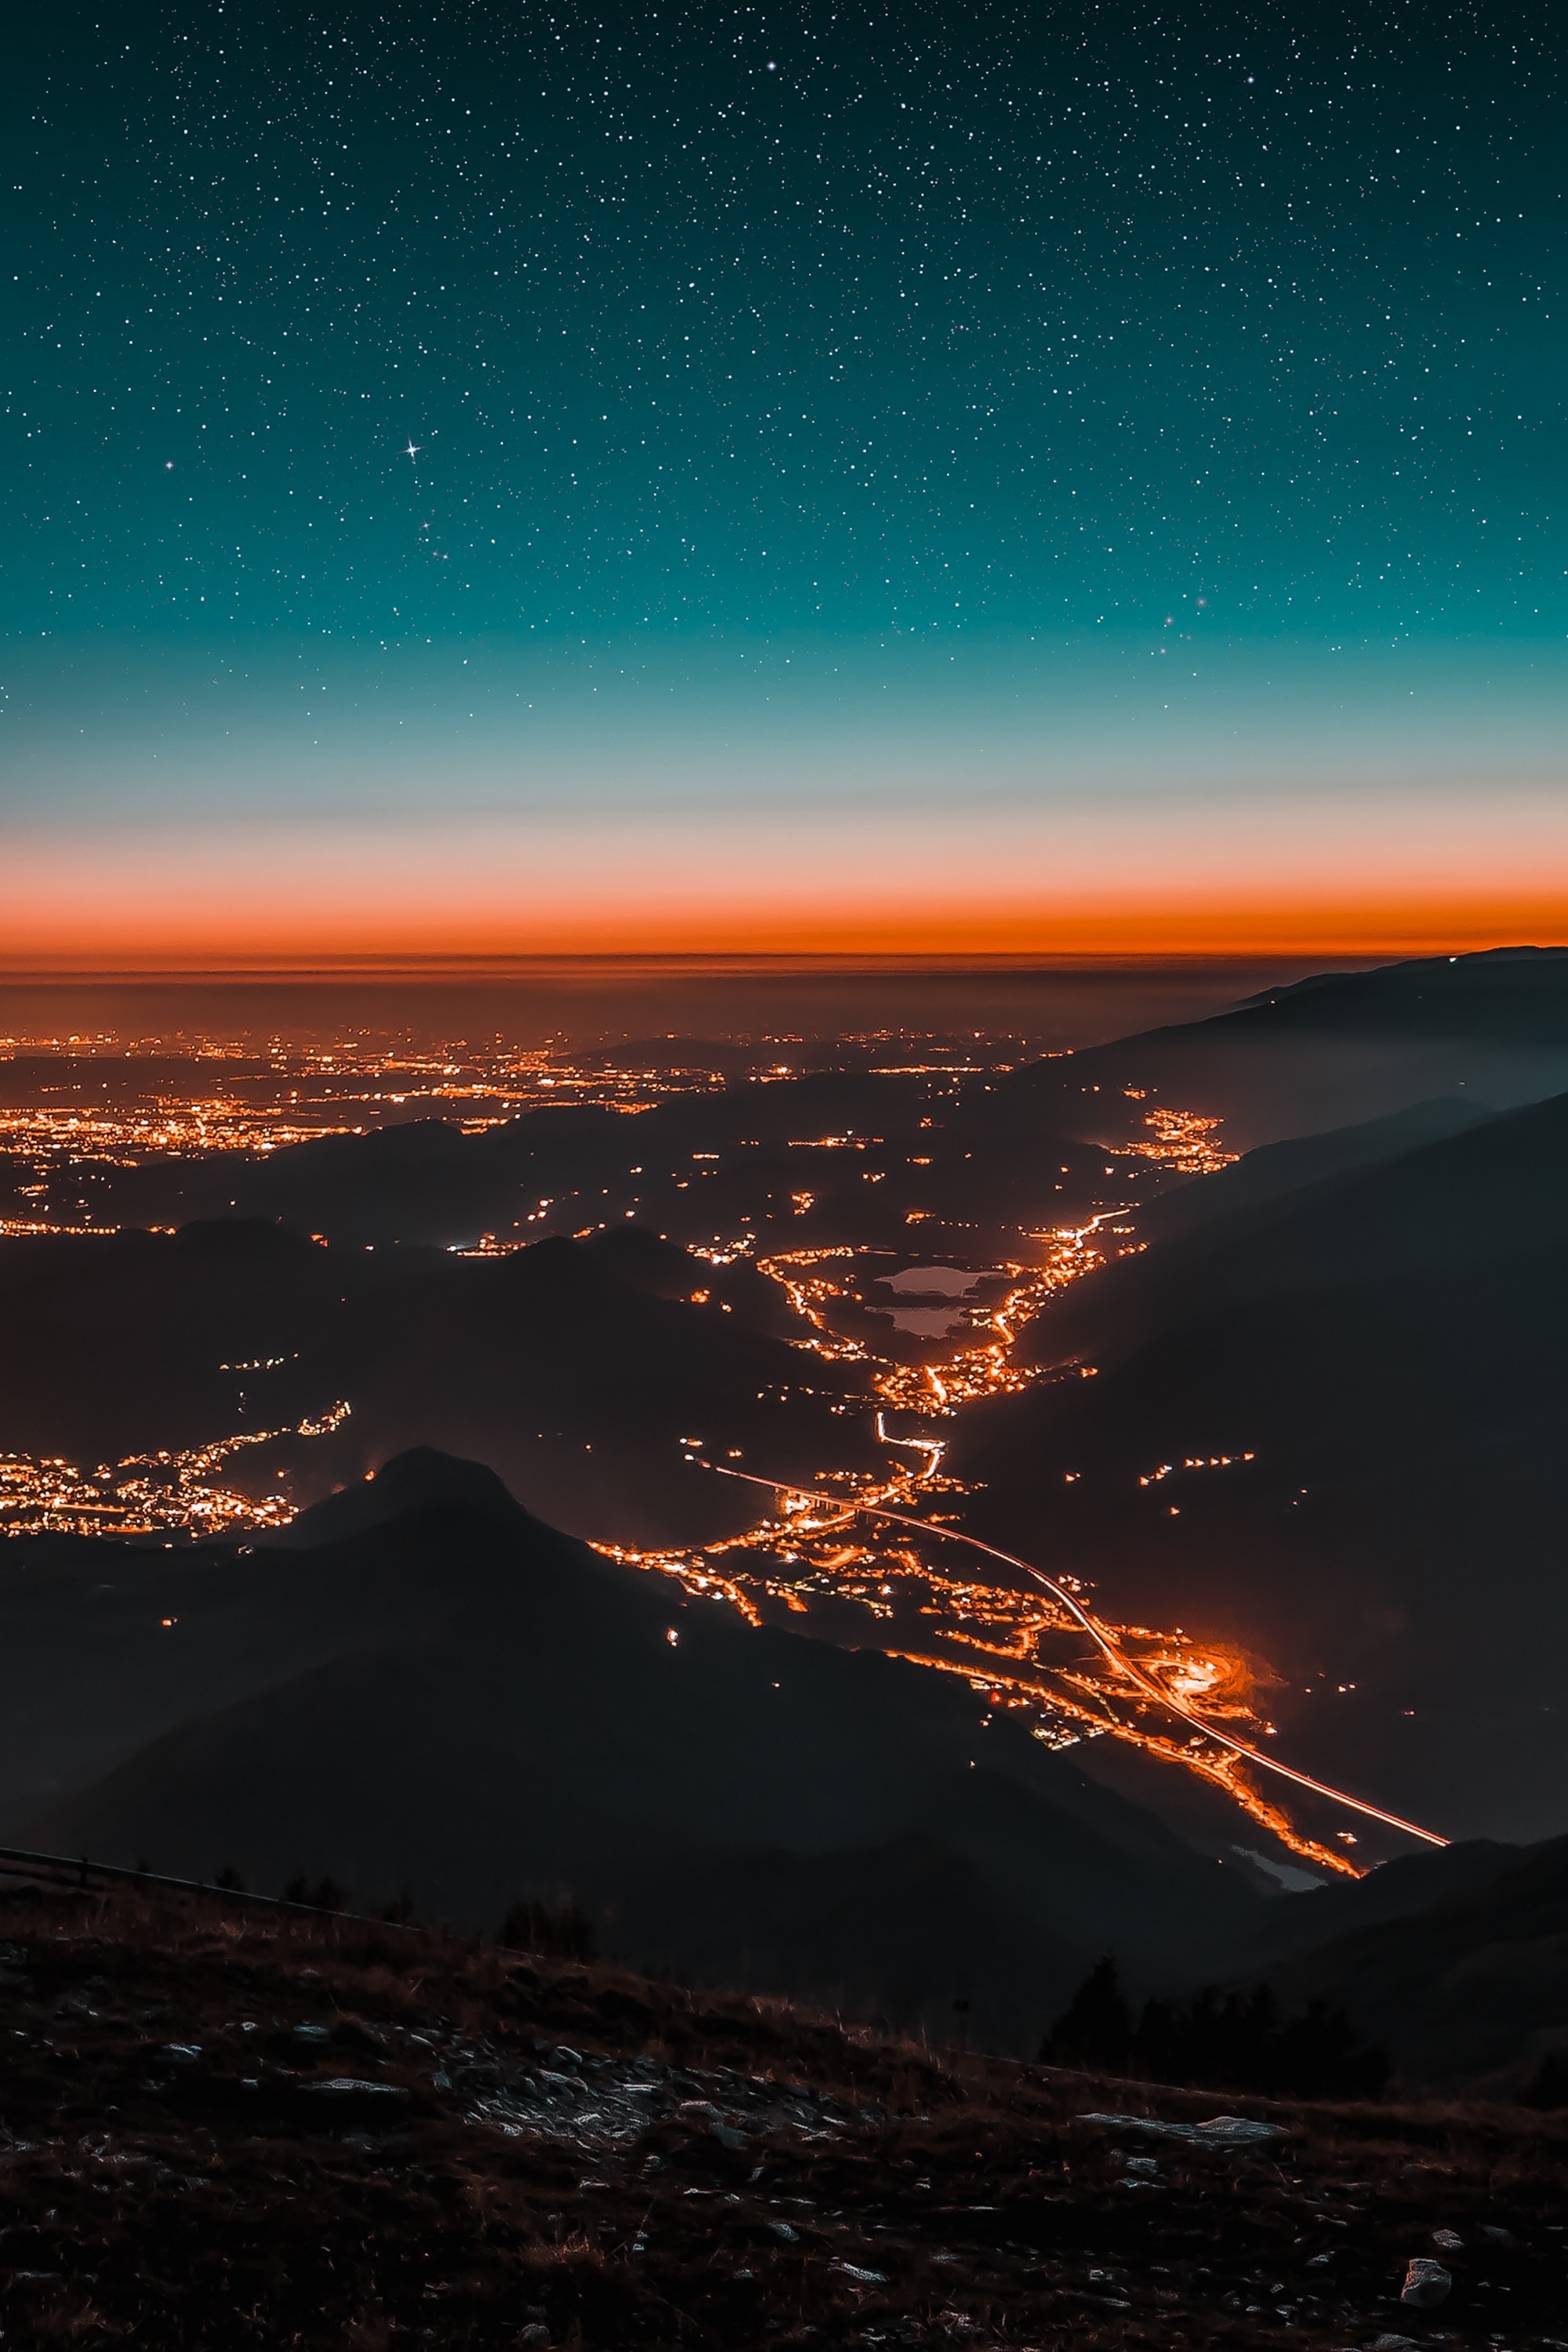 lights, night city, starry sky, cities, mountains, view from above Full HD